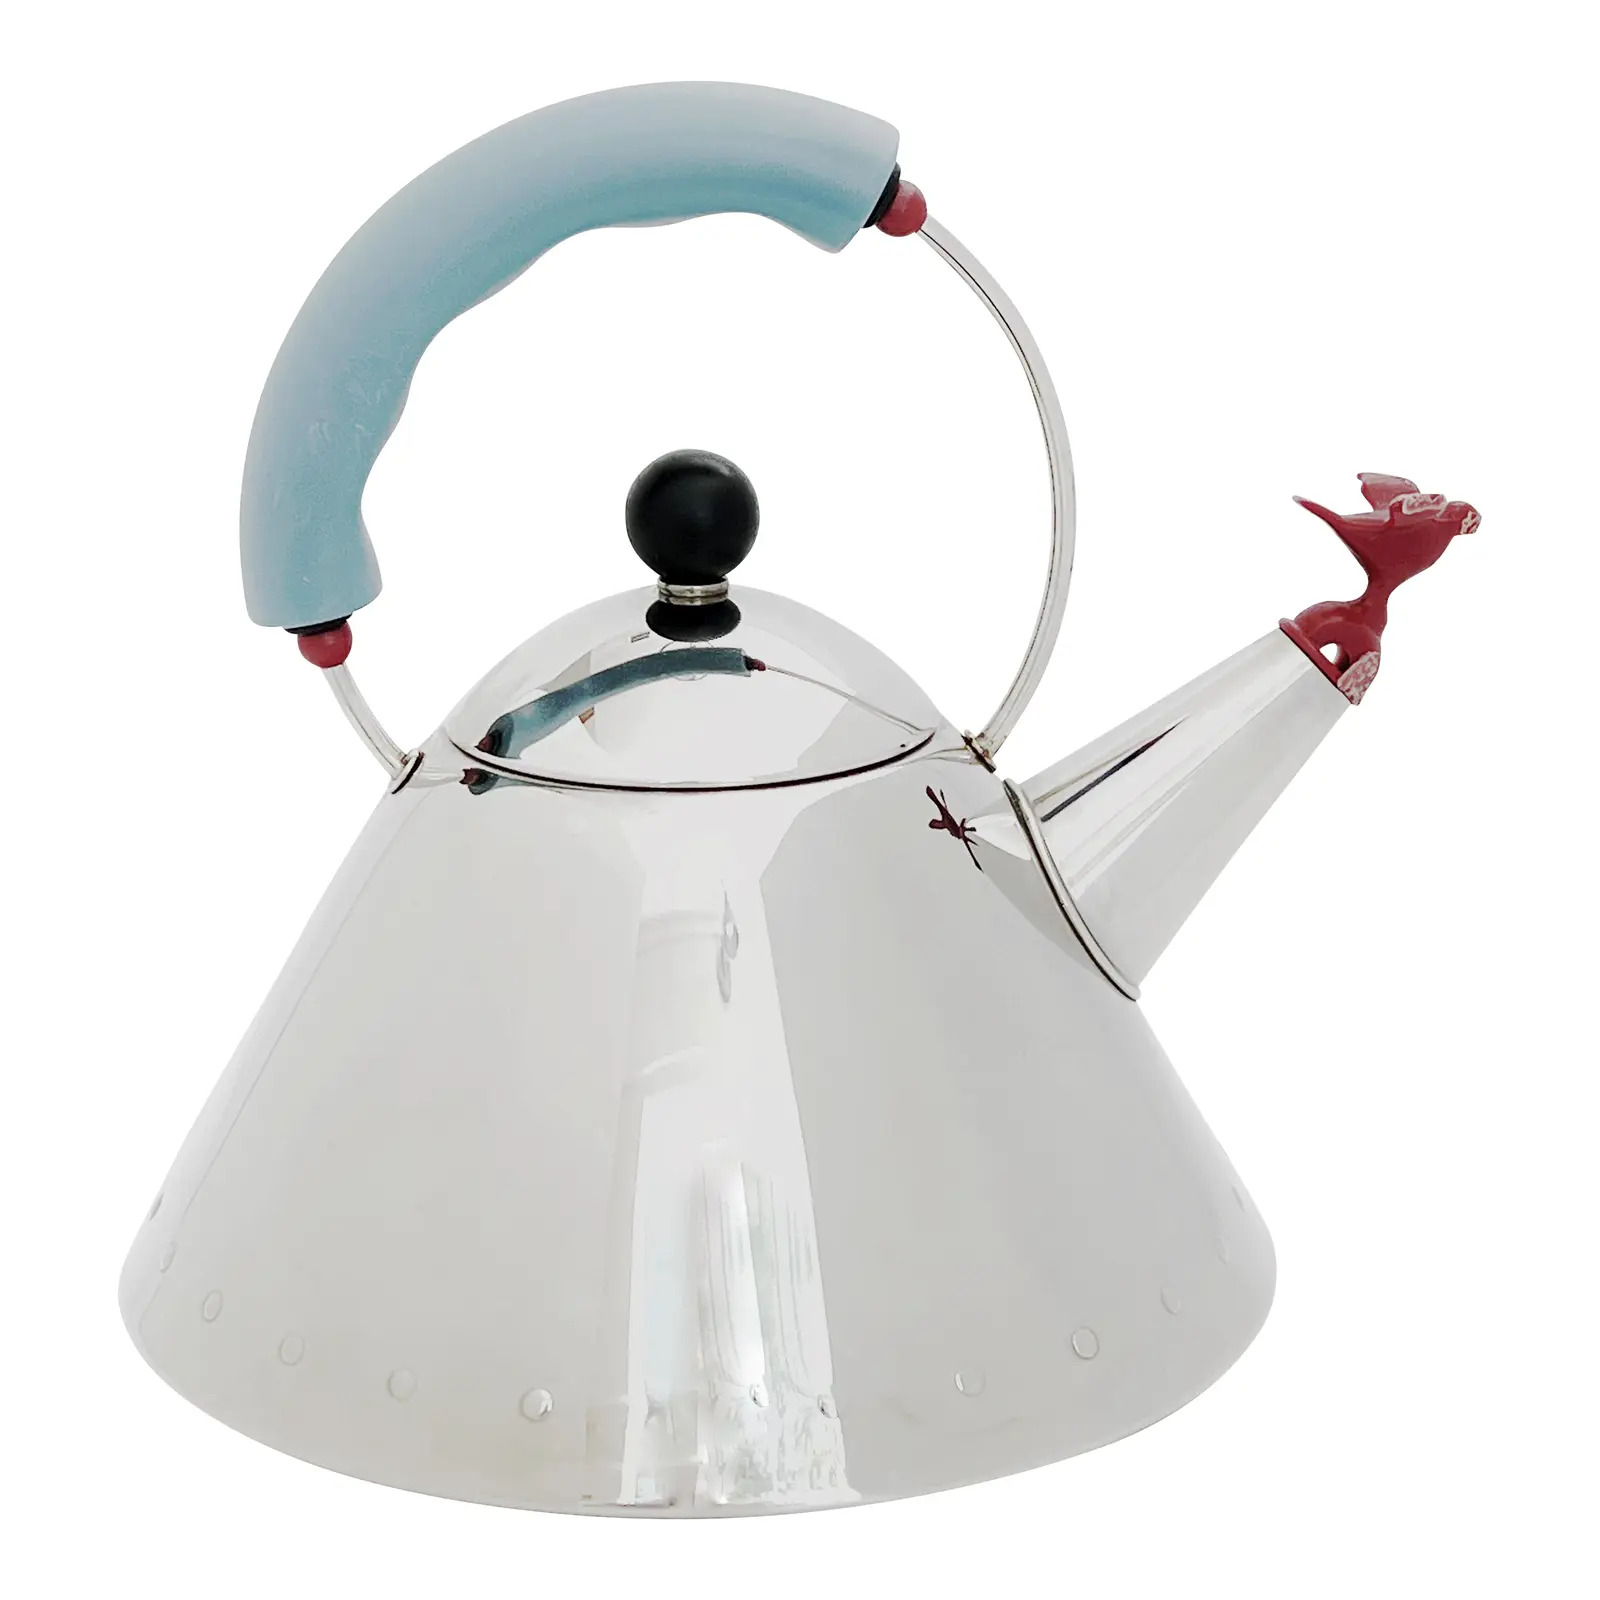 Vintage Alessi Michael Graves Kettle w Bird Whistle, Blue Handle 9093 Stainless